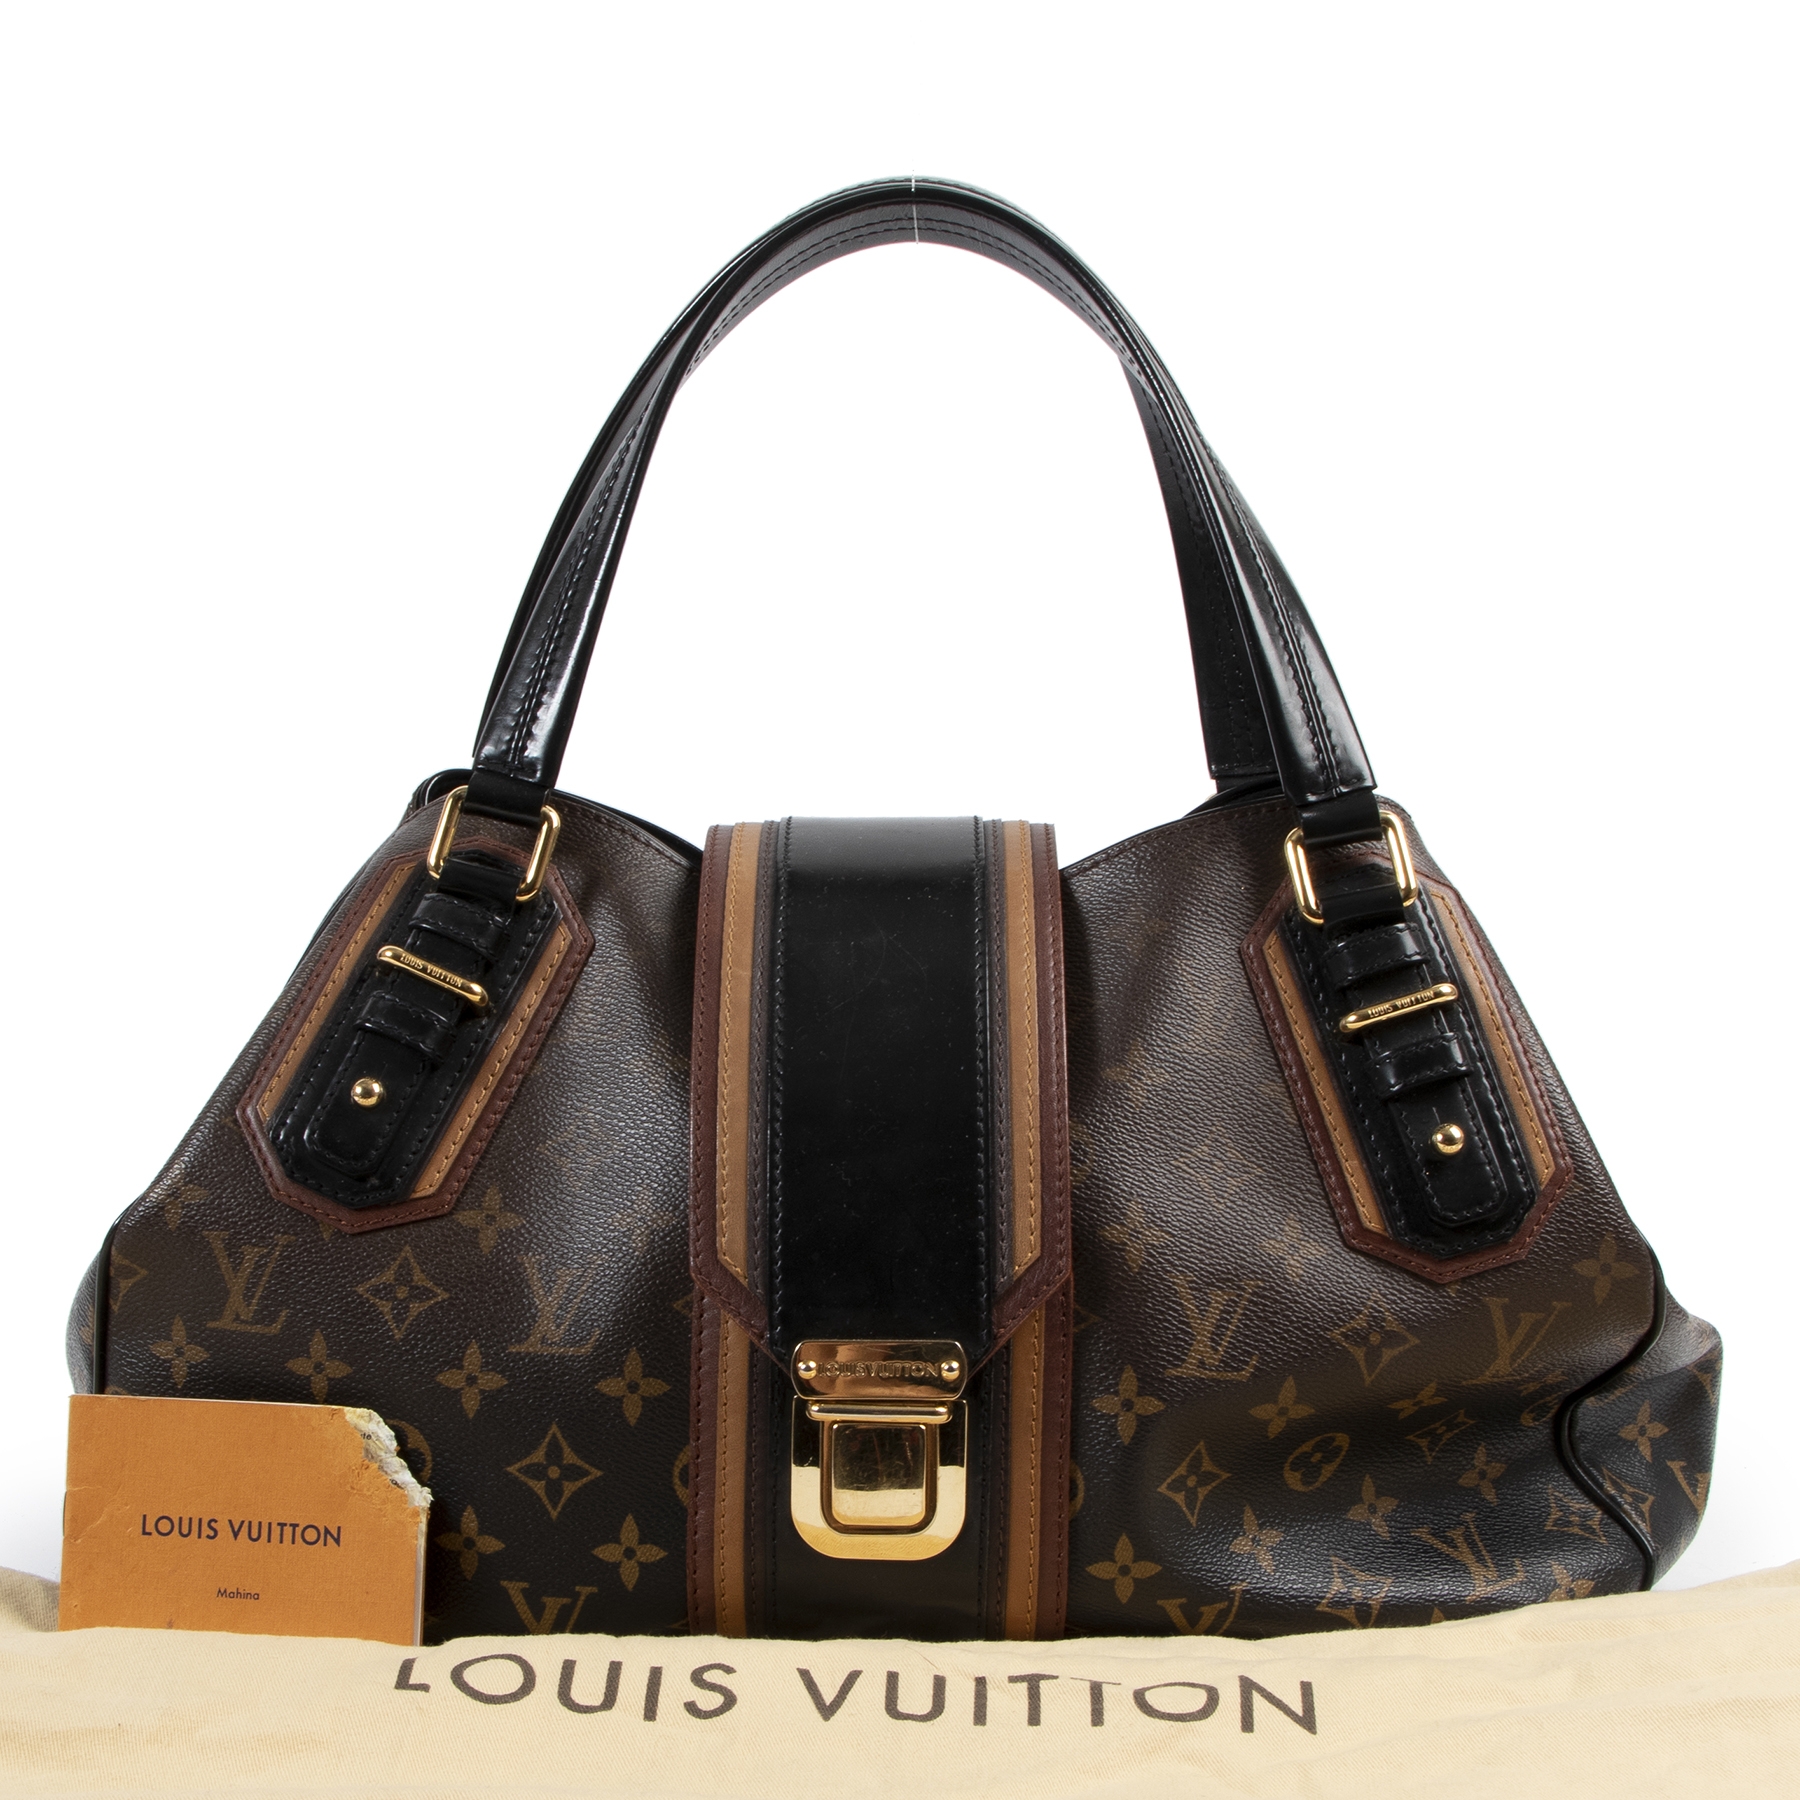 Louis Vuitton Handbags for sale in Byron Bay New South Wales  Facebook  Marketplace  Facebook